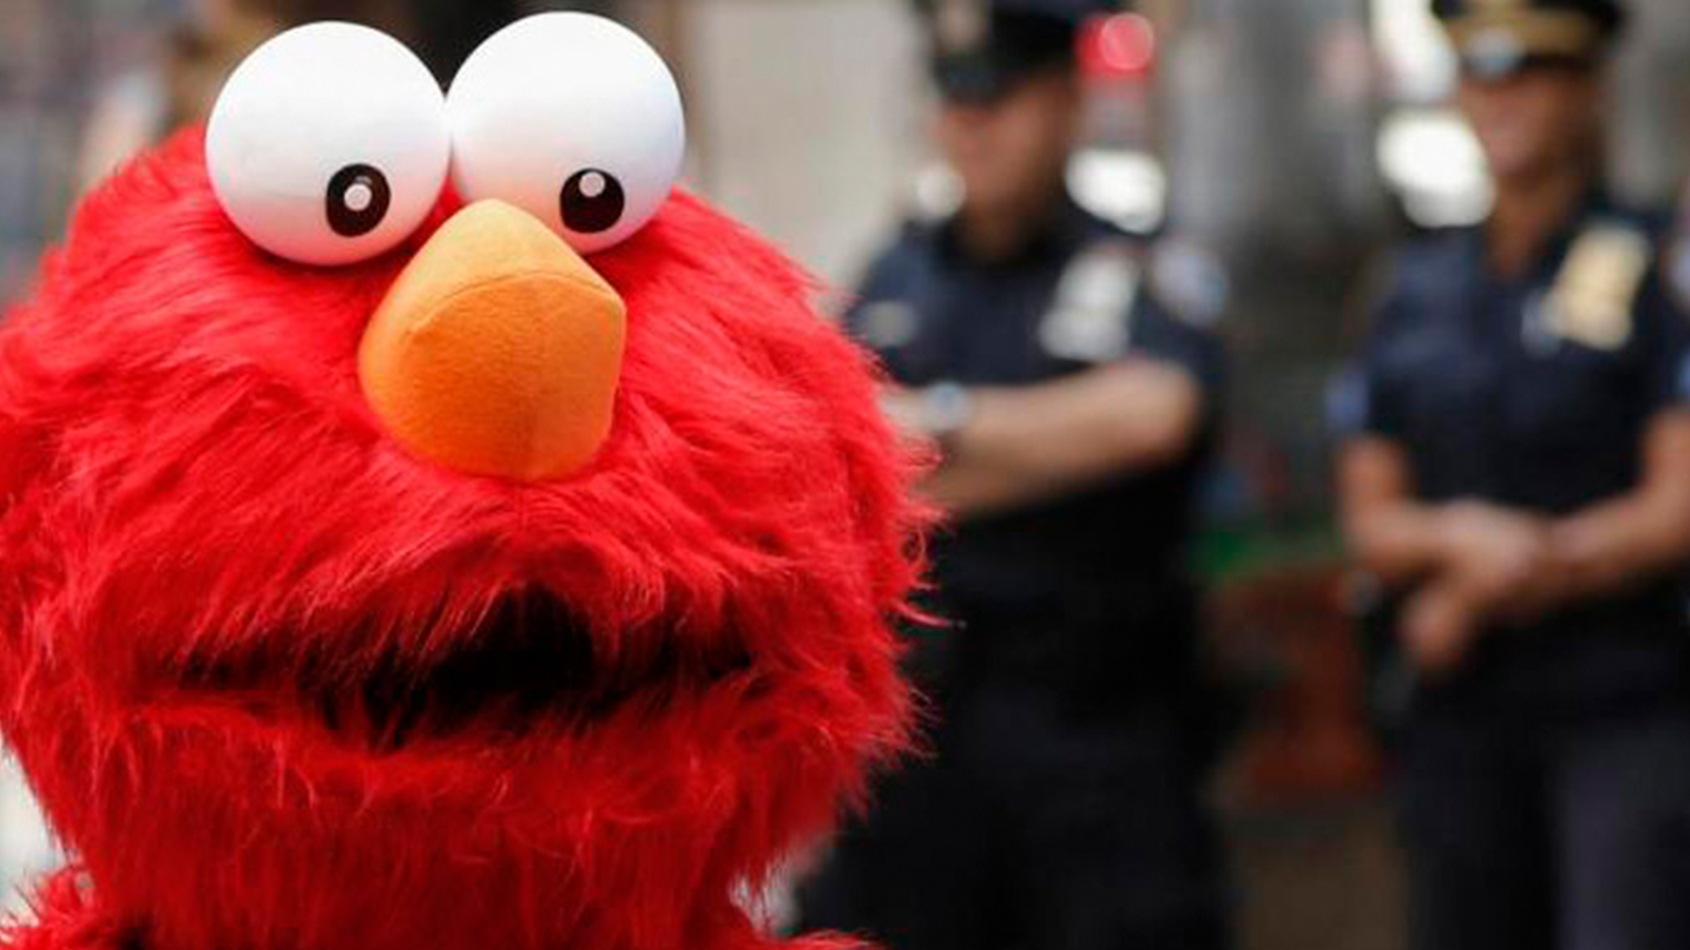 Elmo was fired from TV